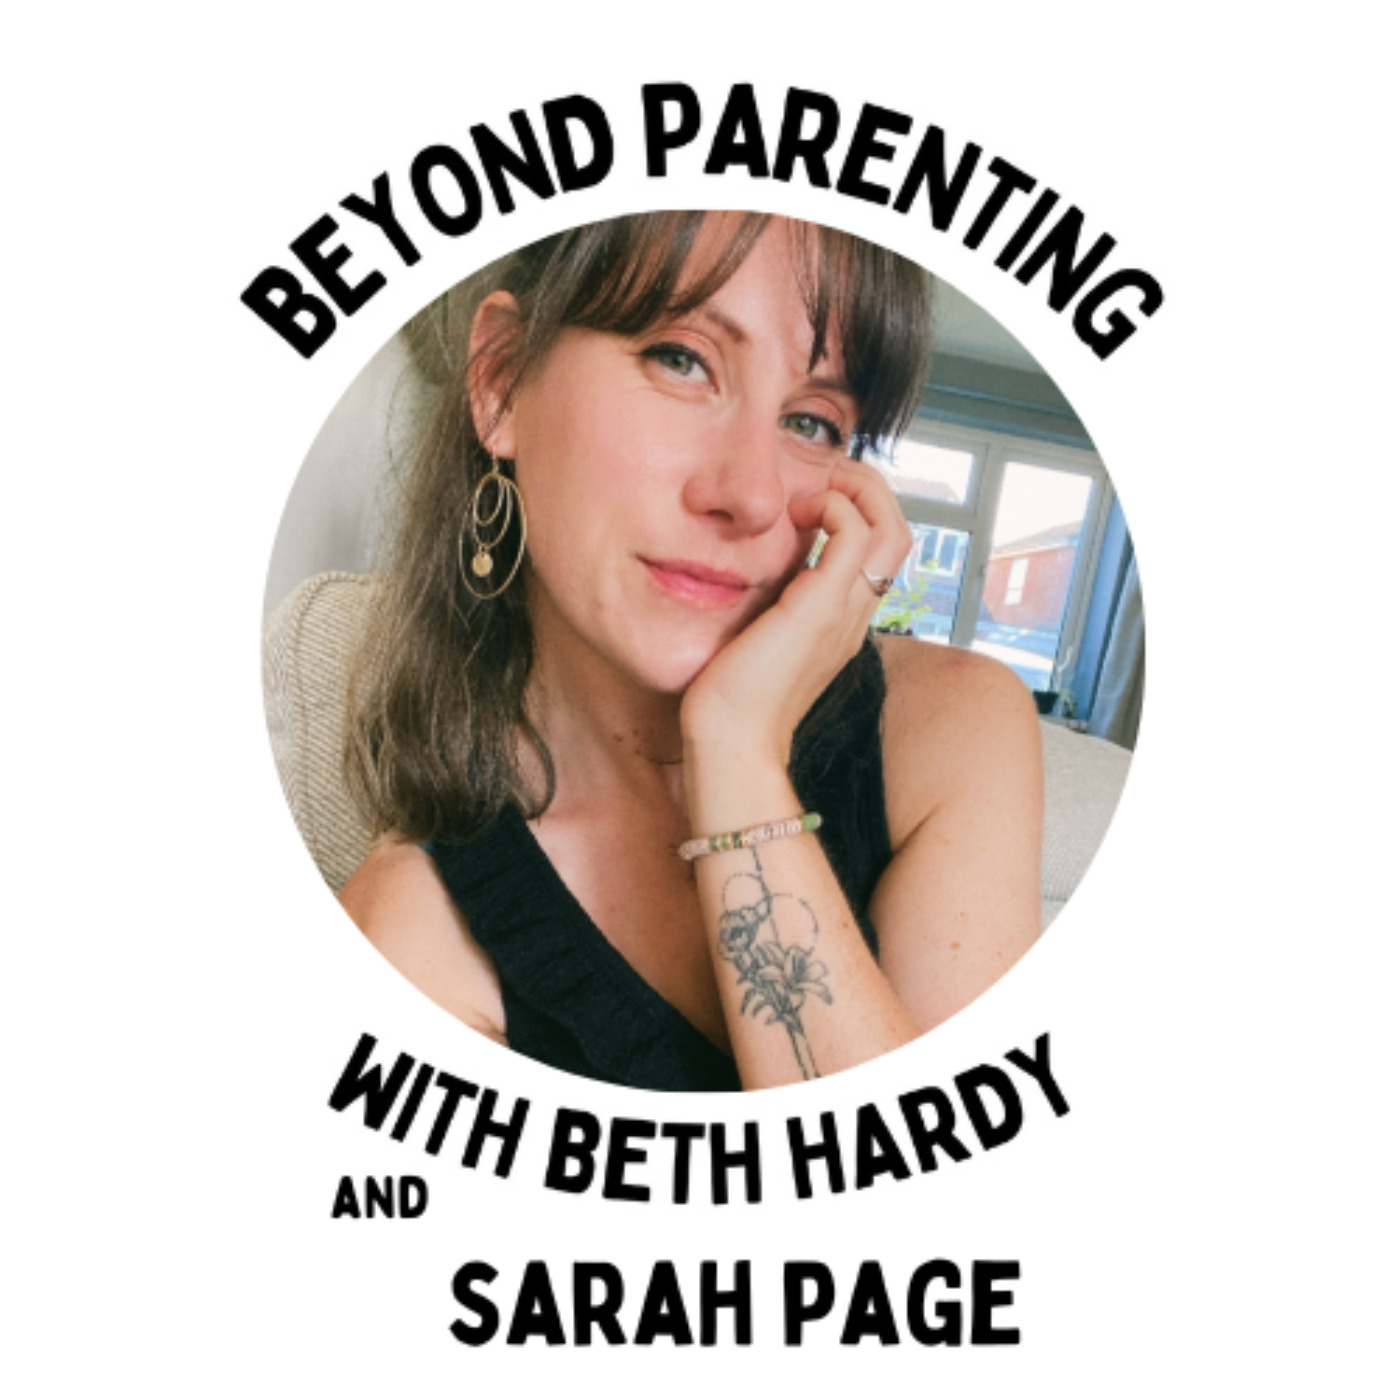 Amicable Co-Parenting with Sarah Page